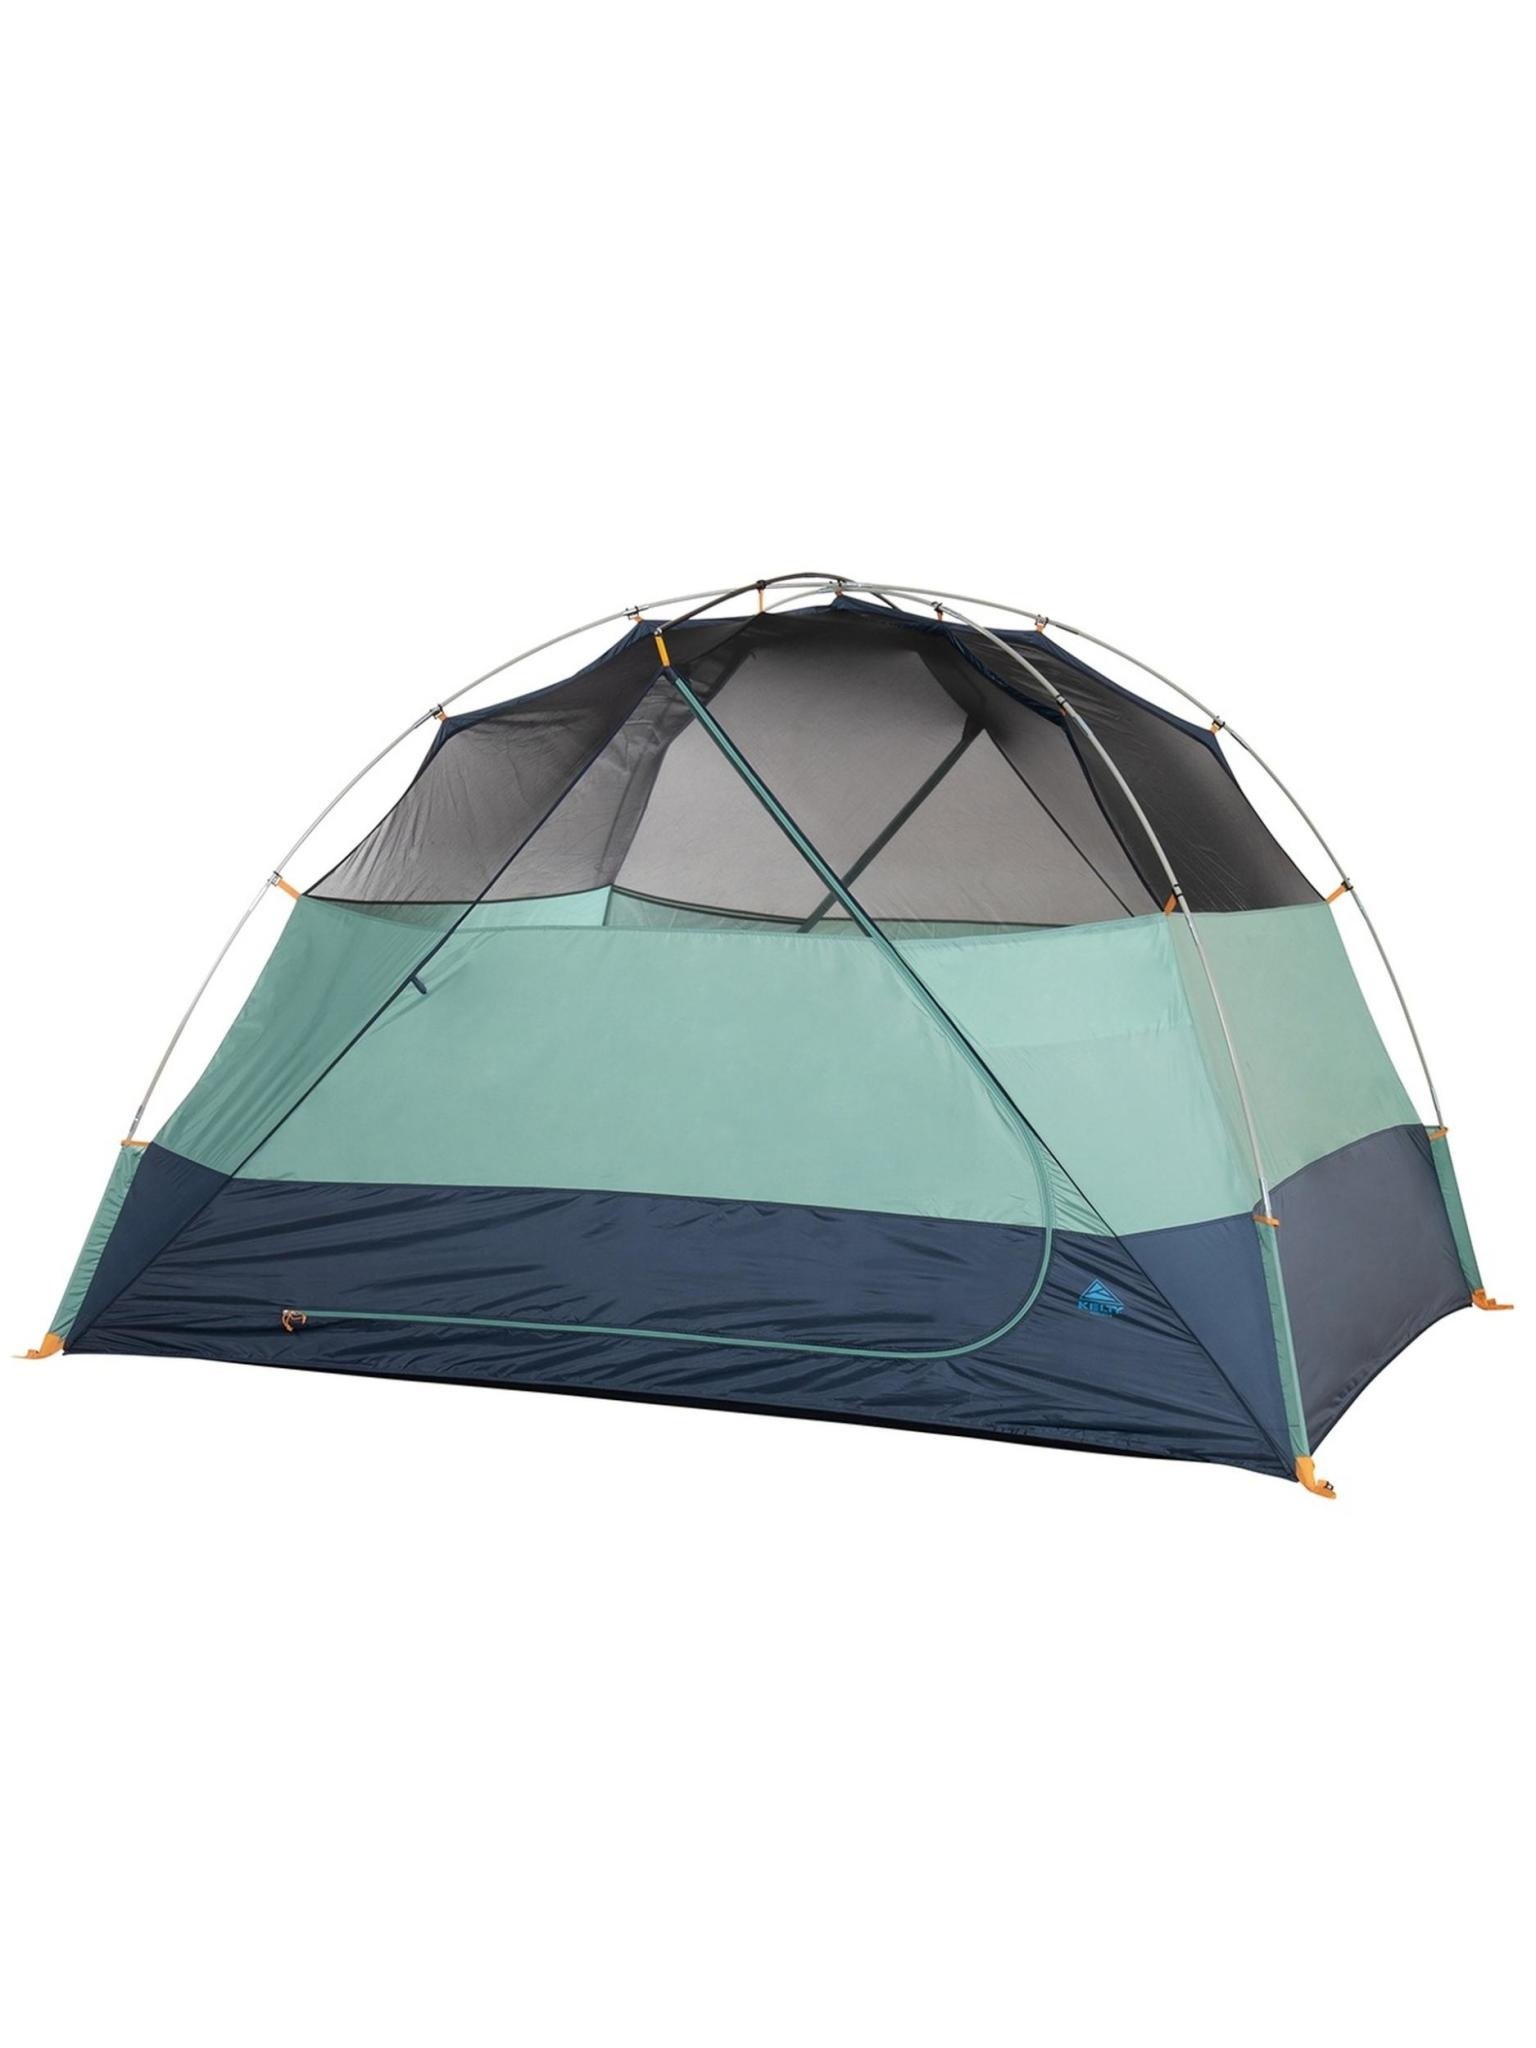 Tents & Sleeping - Pittsboro's premier shop to get your tents 